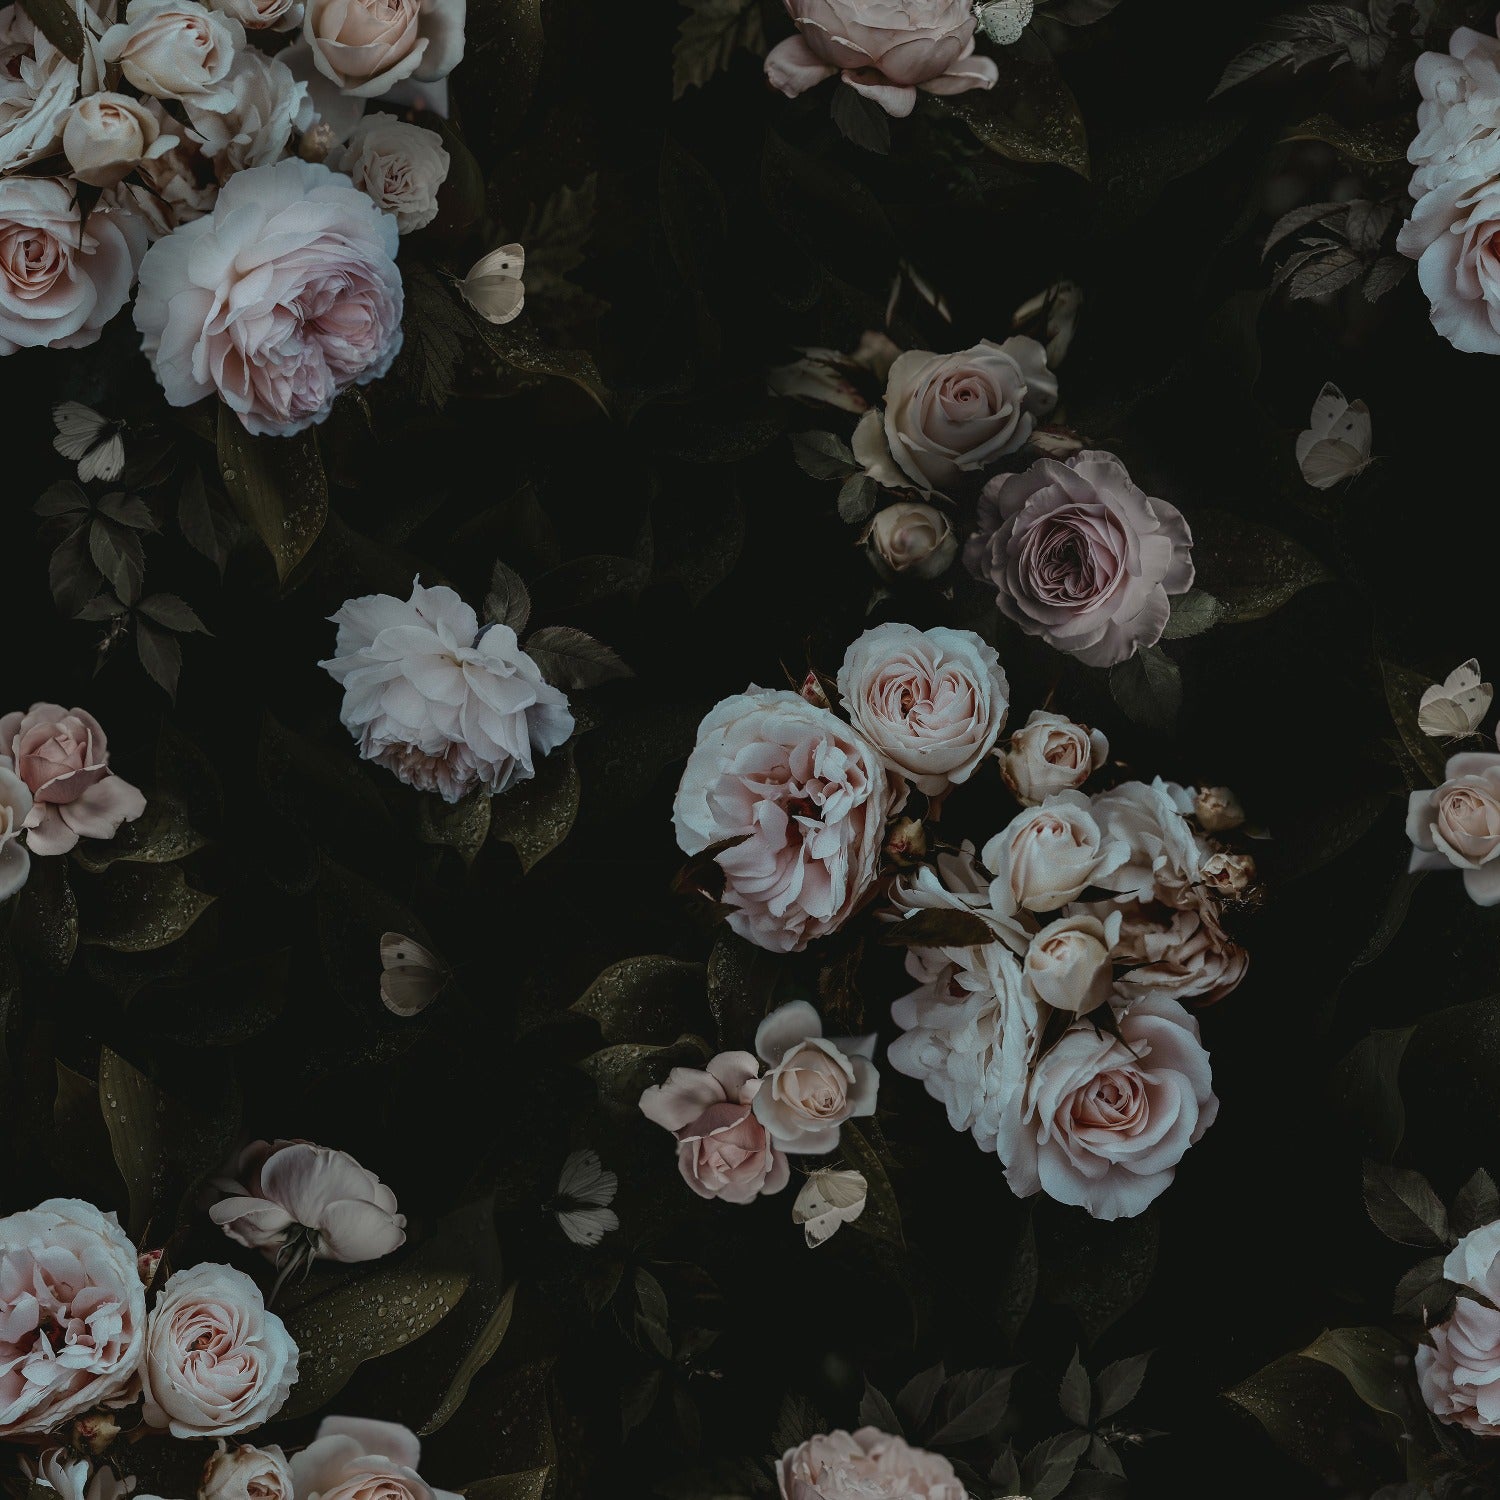 Close-up of the Dark Rose Wallpaper - 75", showcasing lush, detailed roses in shades of pale pink and cream with dark green foliage on a deep black background, creating a dramatic and romantic ambiance.